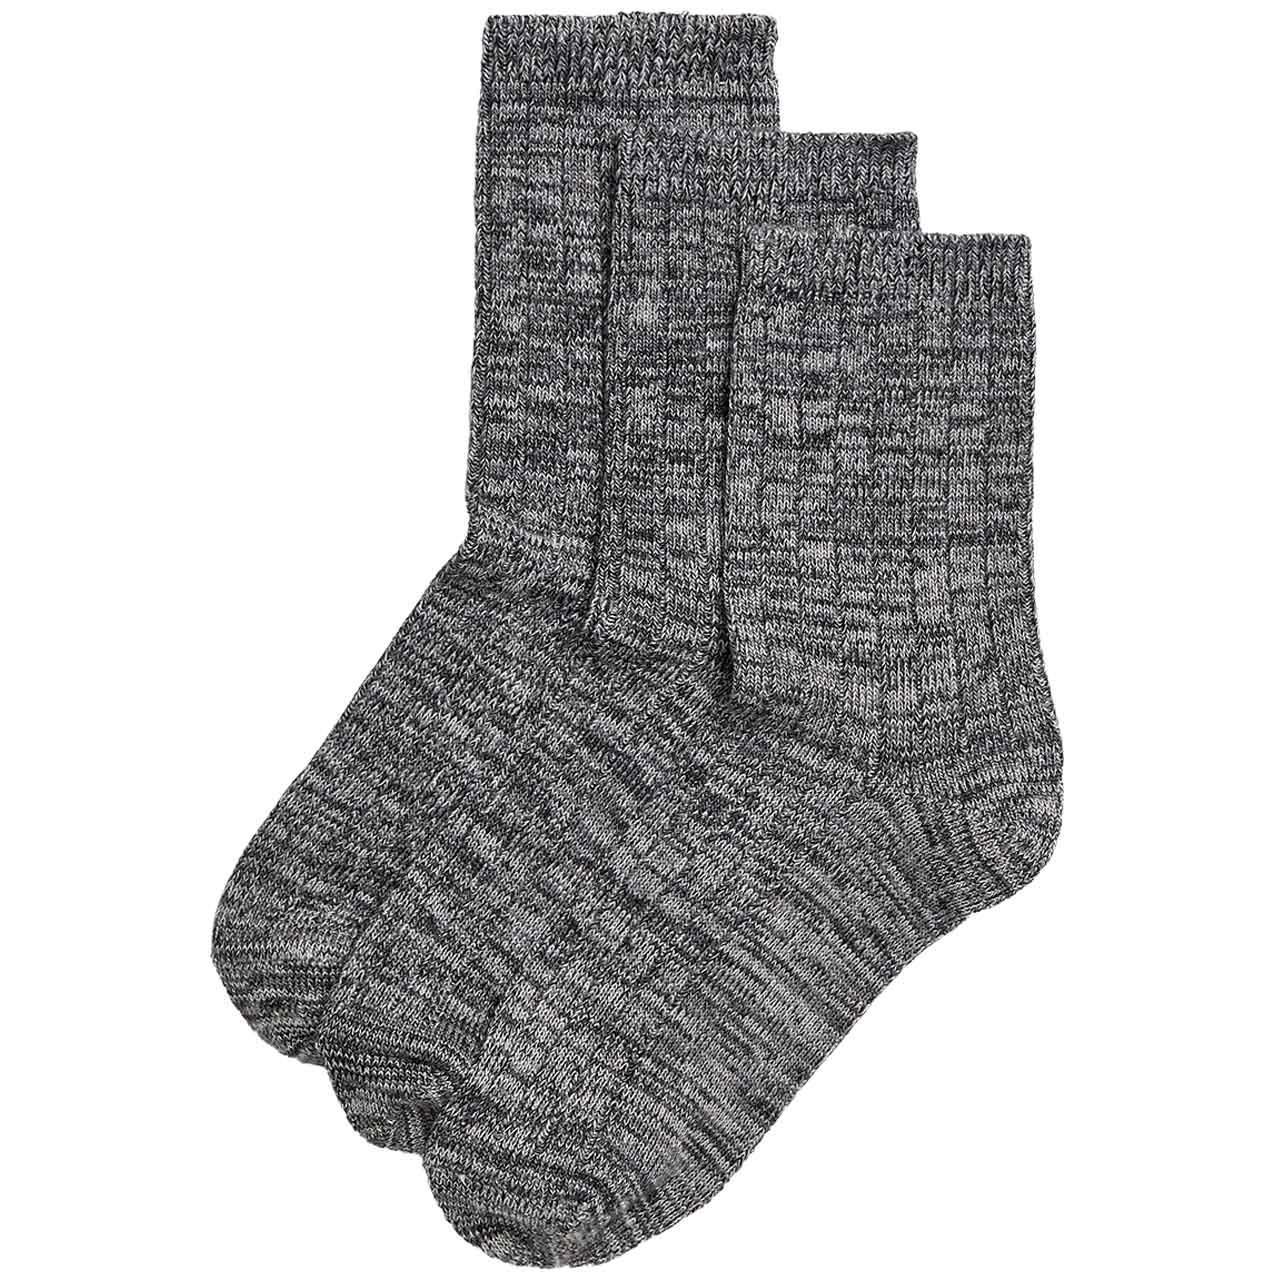 M&S Womens Thermal Sumptuously Soft Ankle High Socks 6-8, Charcoal